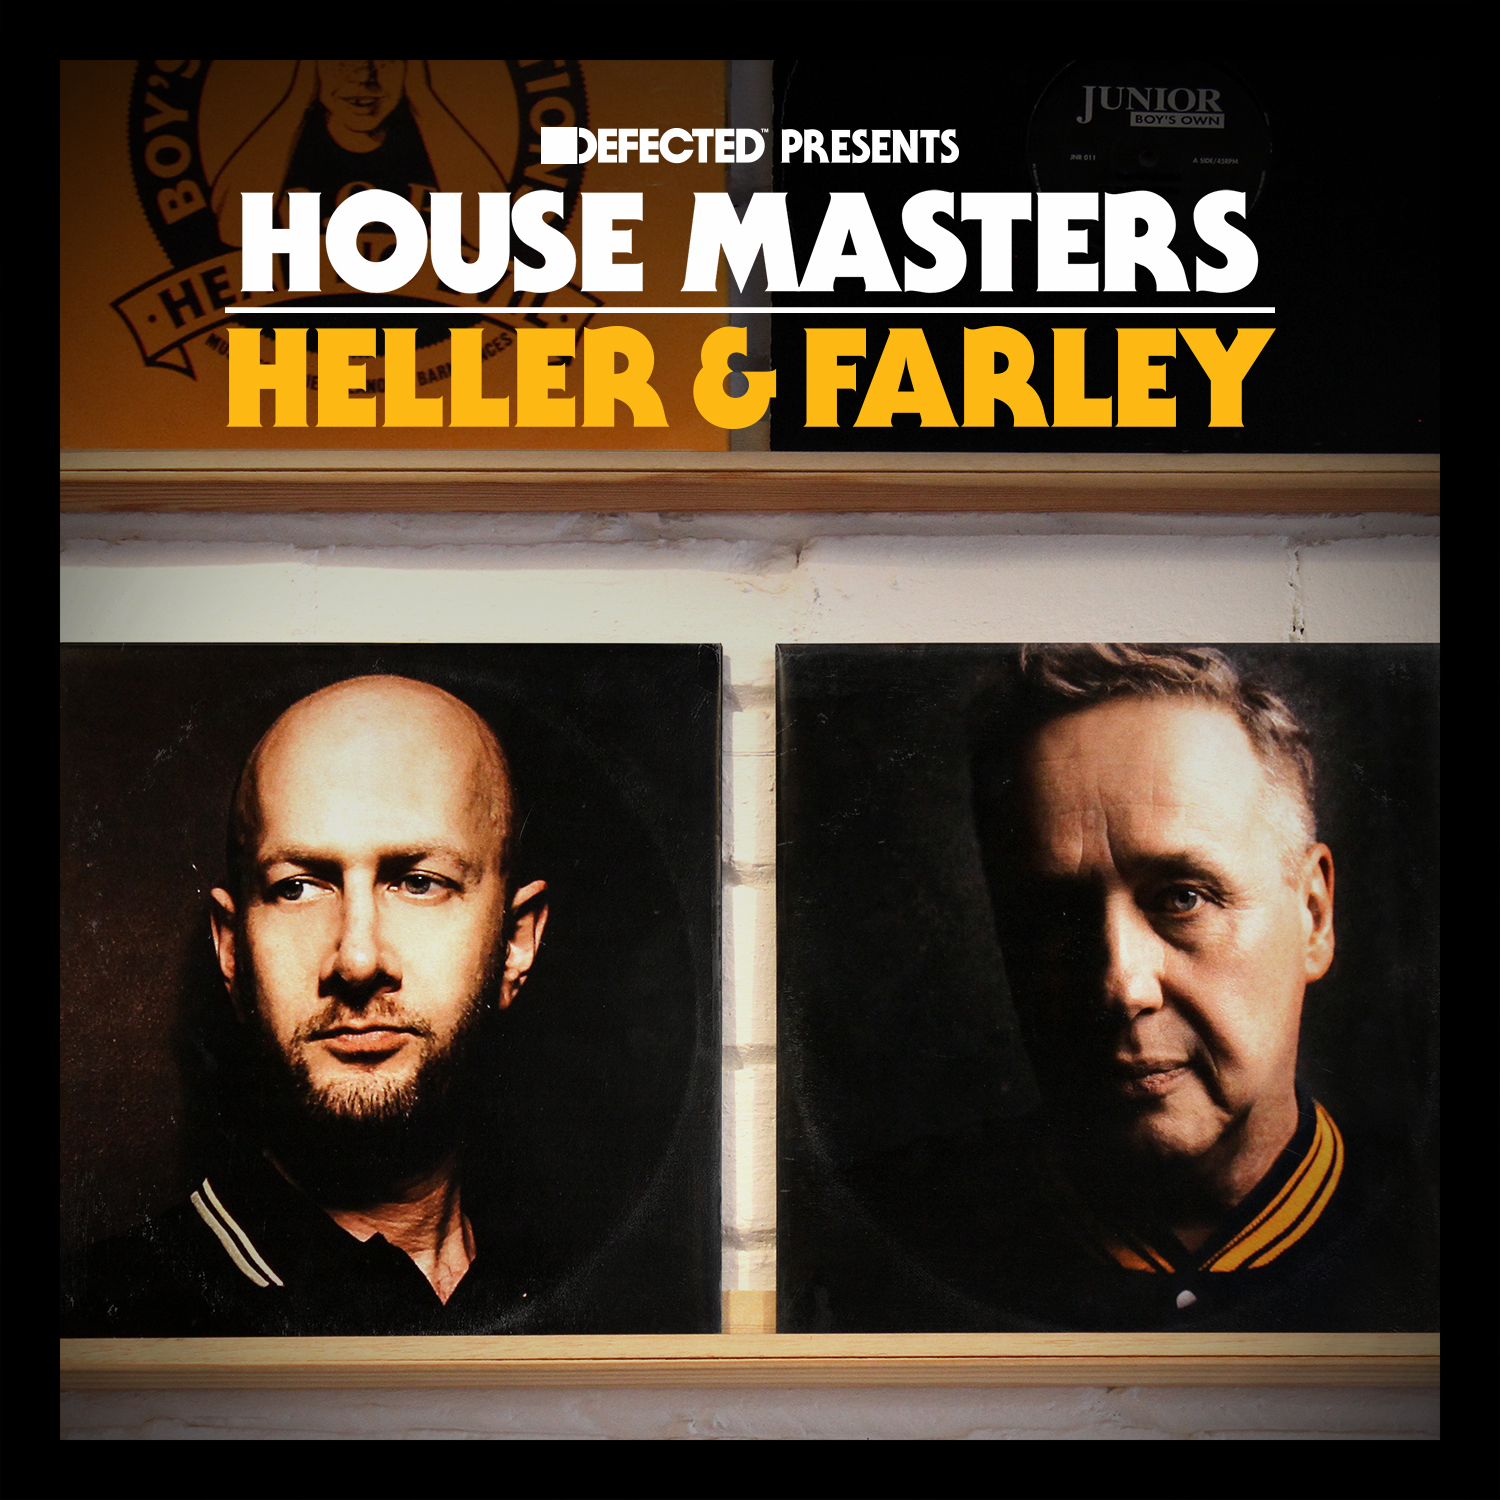 Defected presents House Masters - Junior Jack - Traxsource